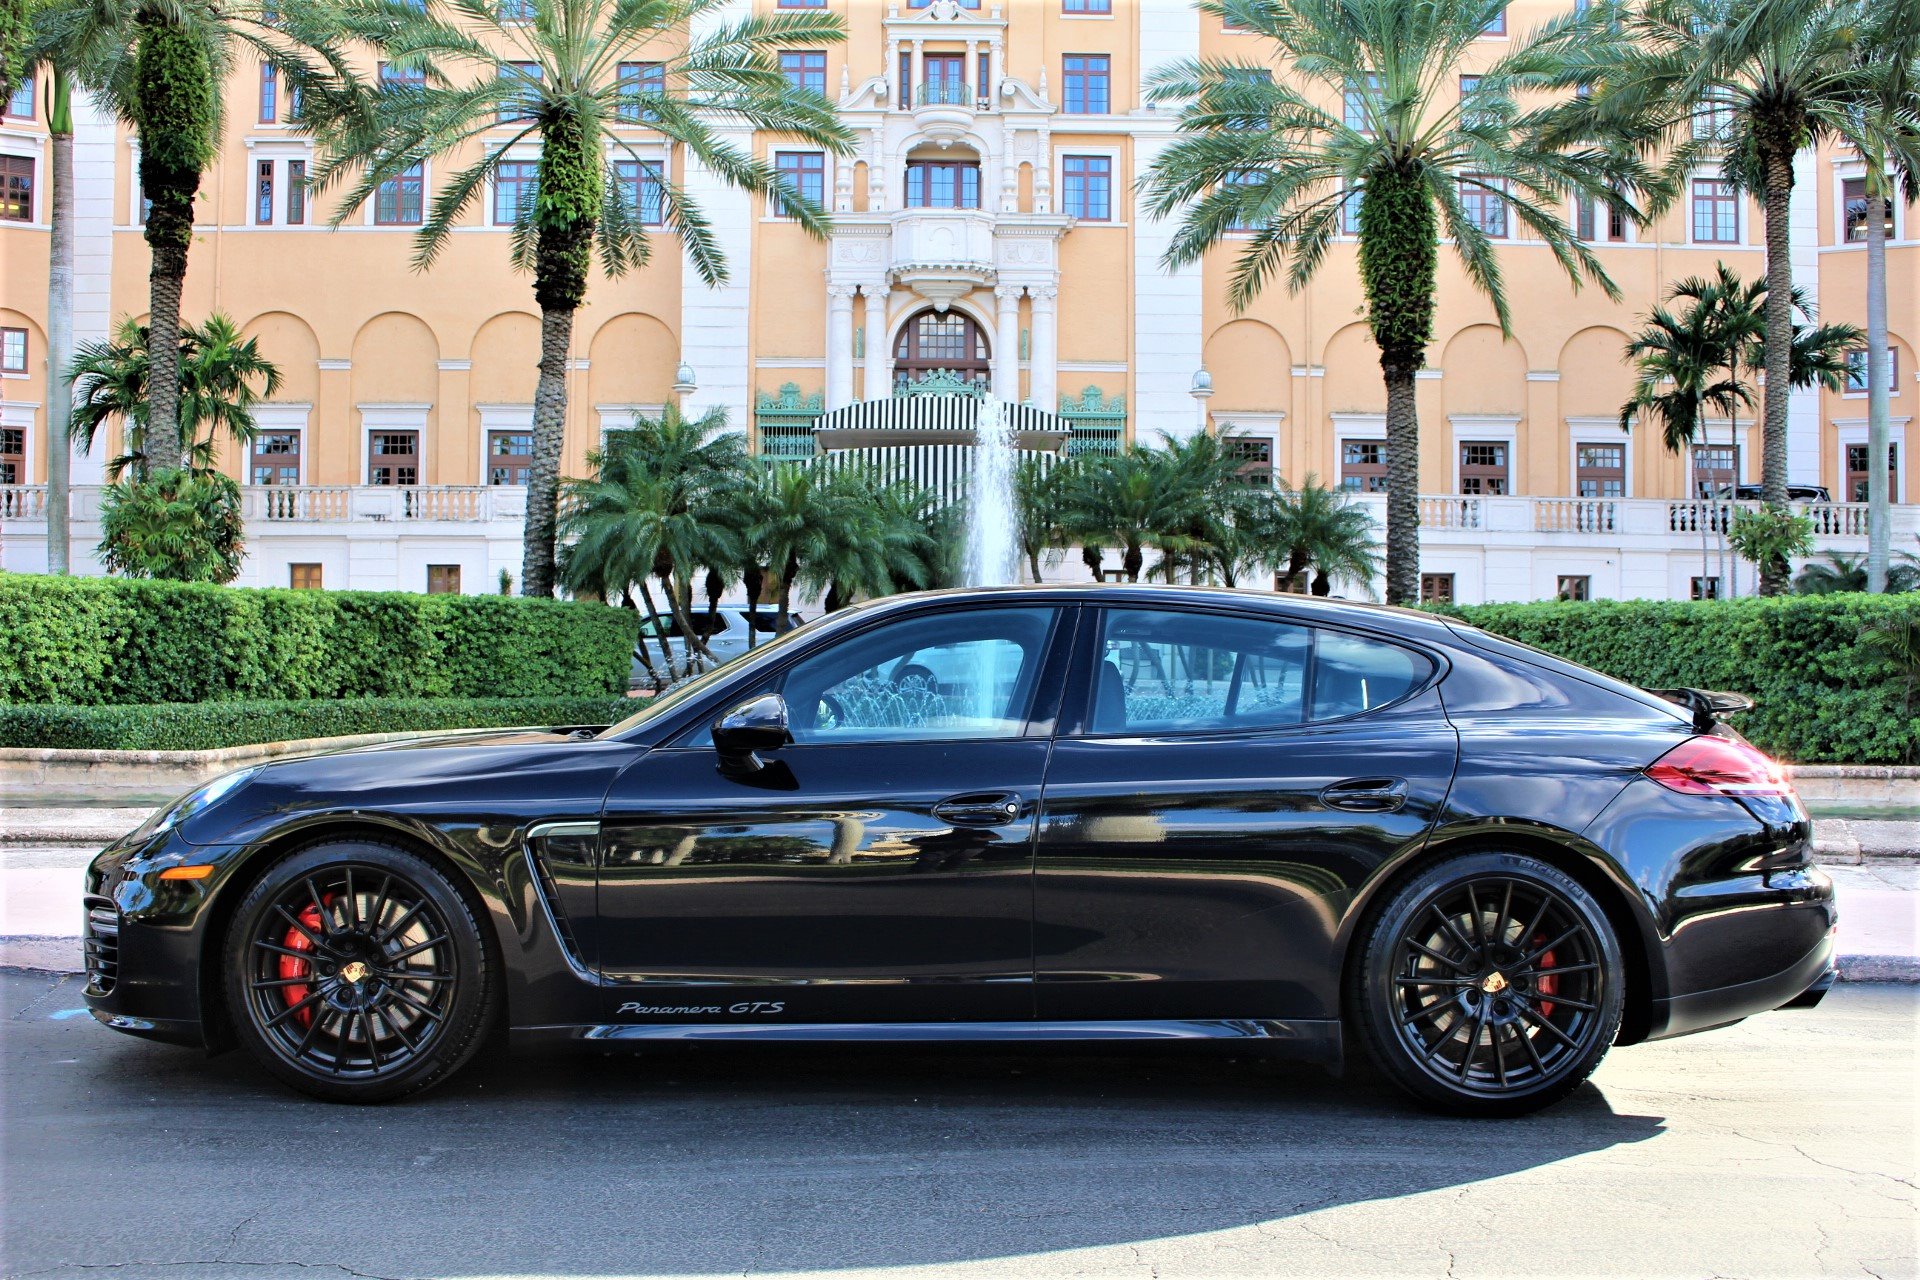 Used 2014 Porsche Panamera GTS for sale Sold at The Gables Sports Cars in Miami FL 33146 2